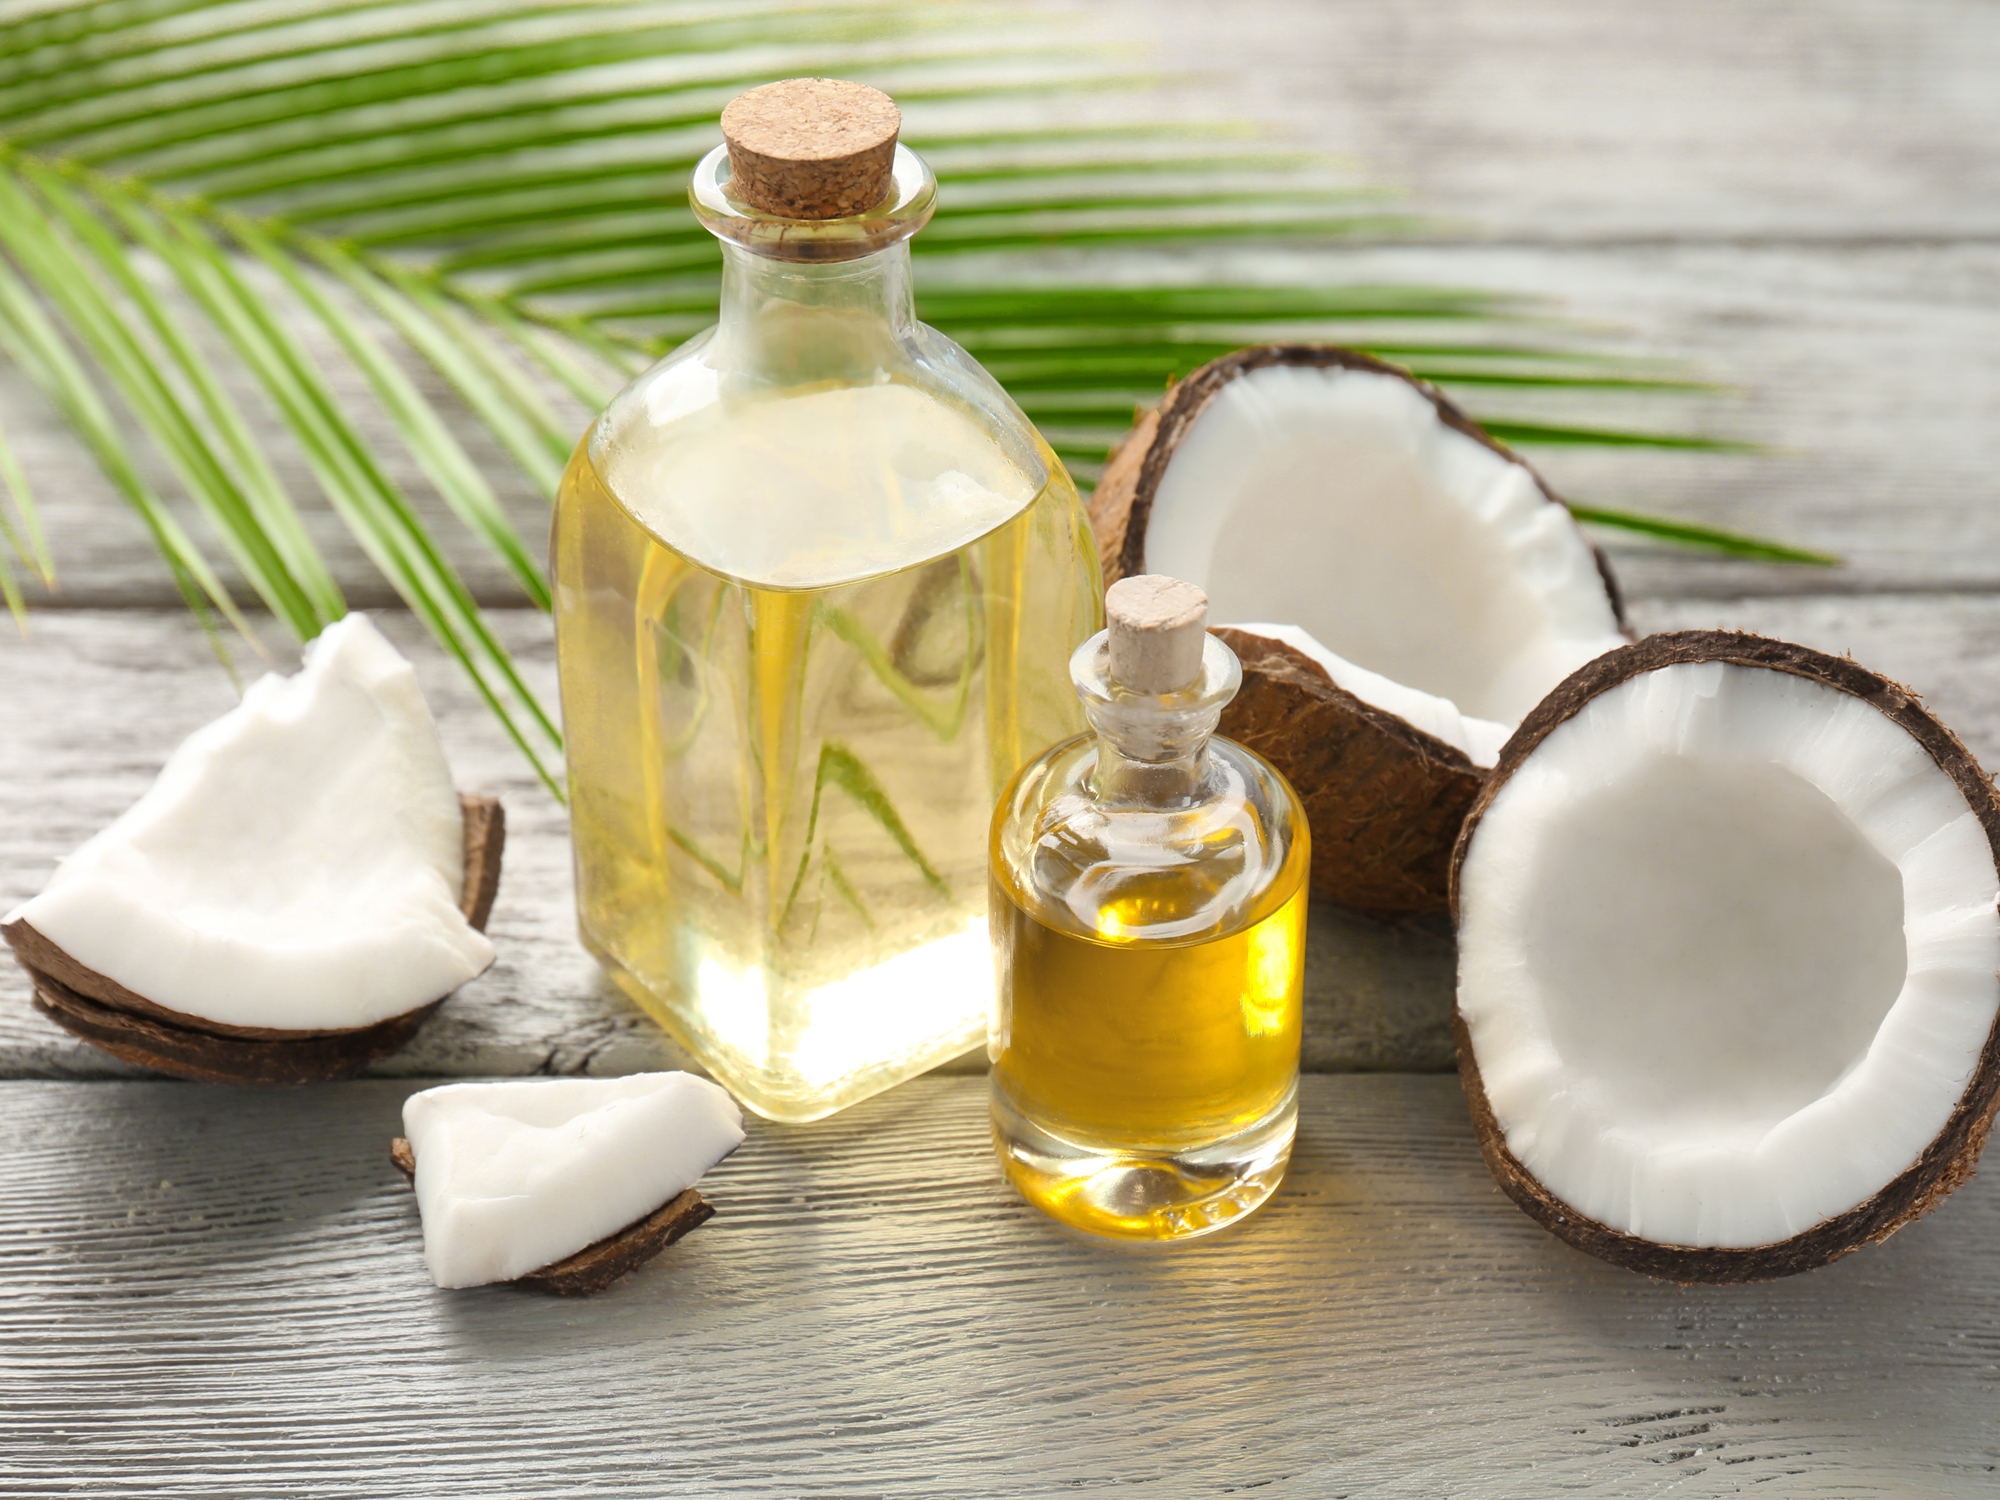 Coconut oil stops this deadly gut bacteria in its tracks